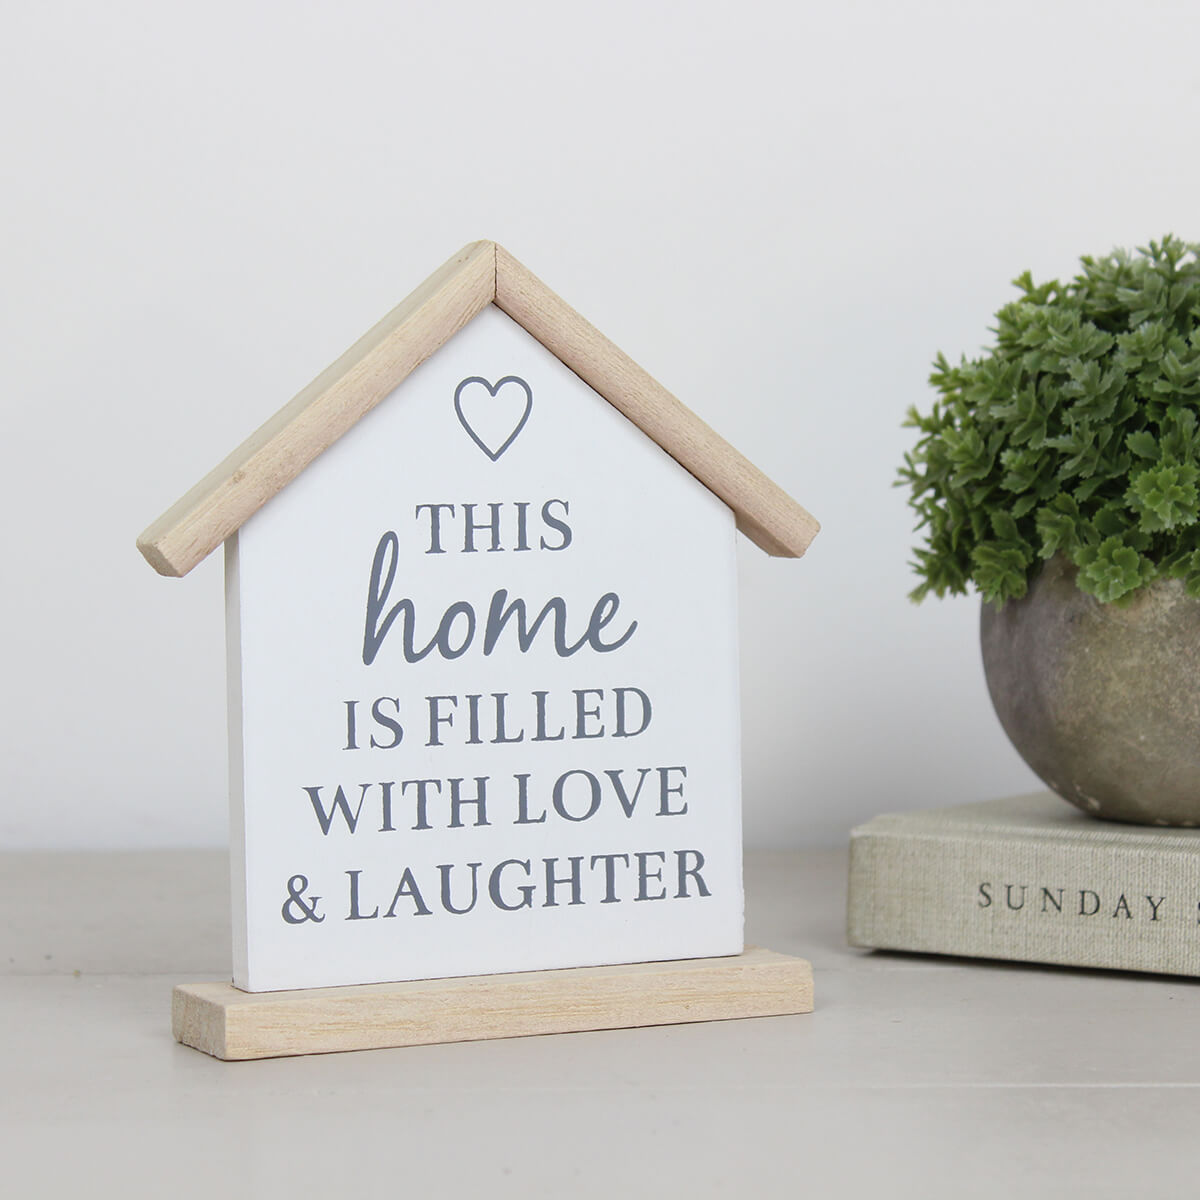 House Shaped Home Signs